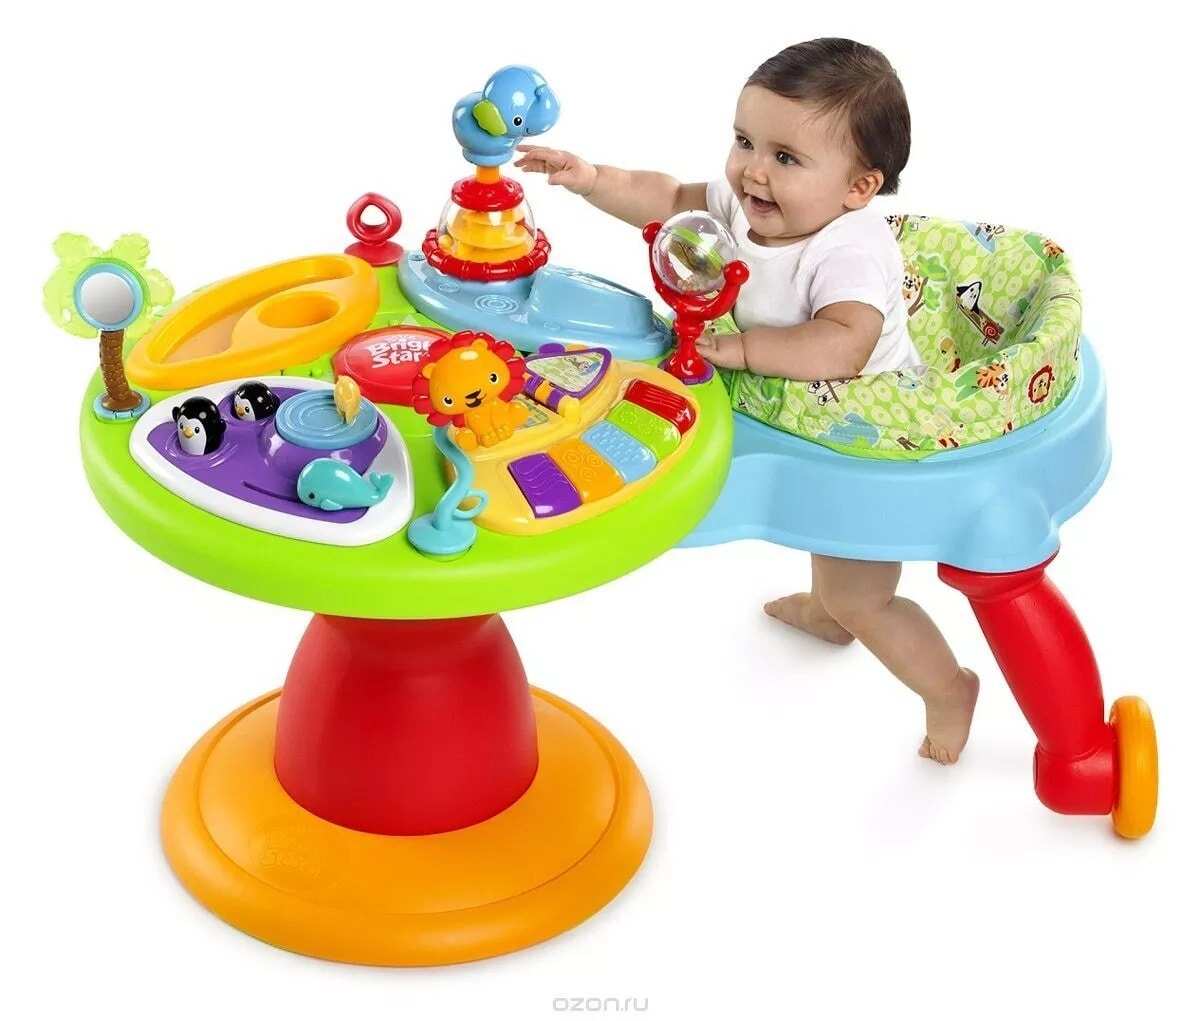 right age for baby walker